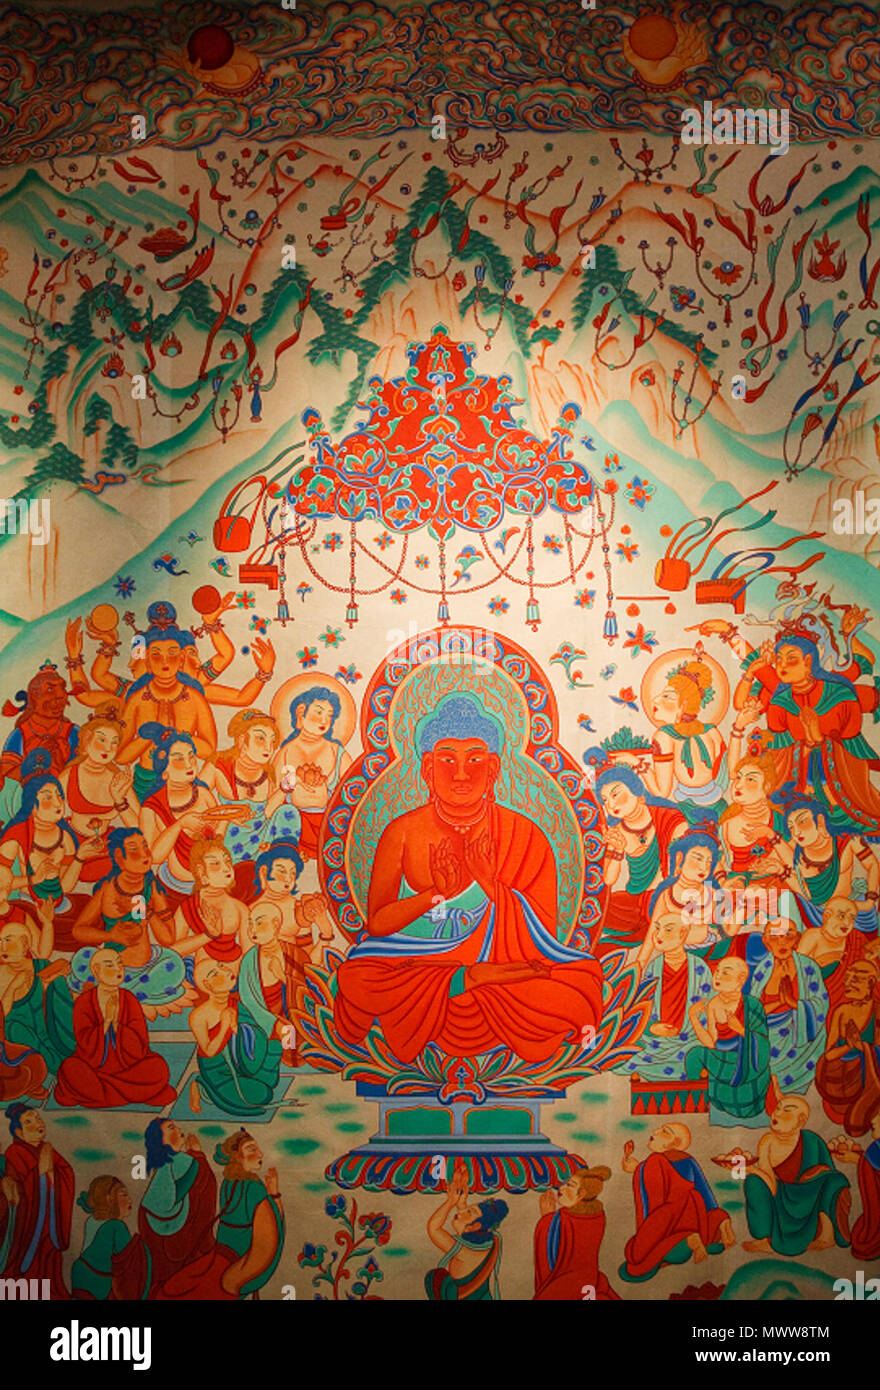 . English: Amitabha Buddha in the western pure land of Sukhavati. Dunhuang, Mogao Caves, China, Tang Dynasty. 28 June 2009. File created by user 'pandahermit.' Artwork created by anonymous ancient source. 42 Amitabha Buddha Sukhavati Dunhuang Mogao Caves Stock Photo